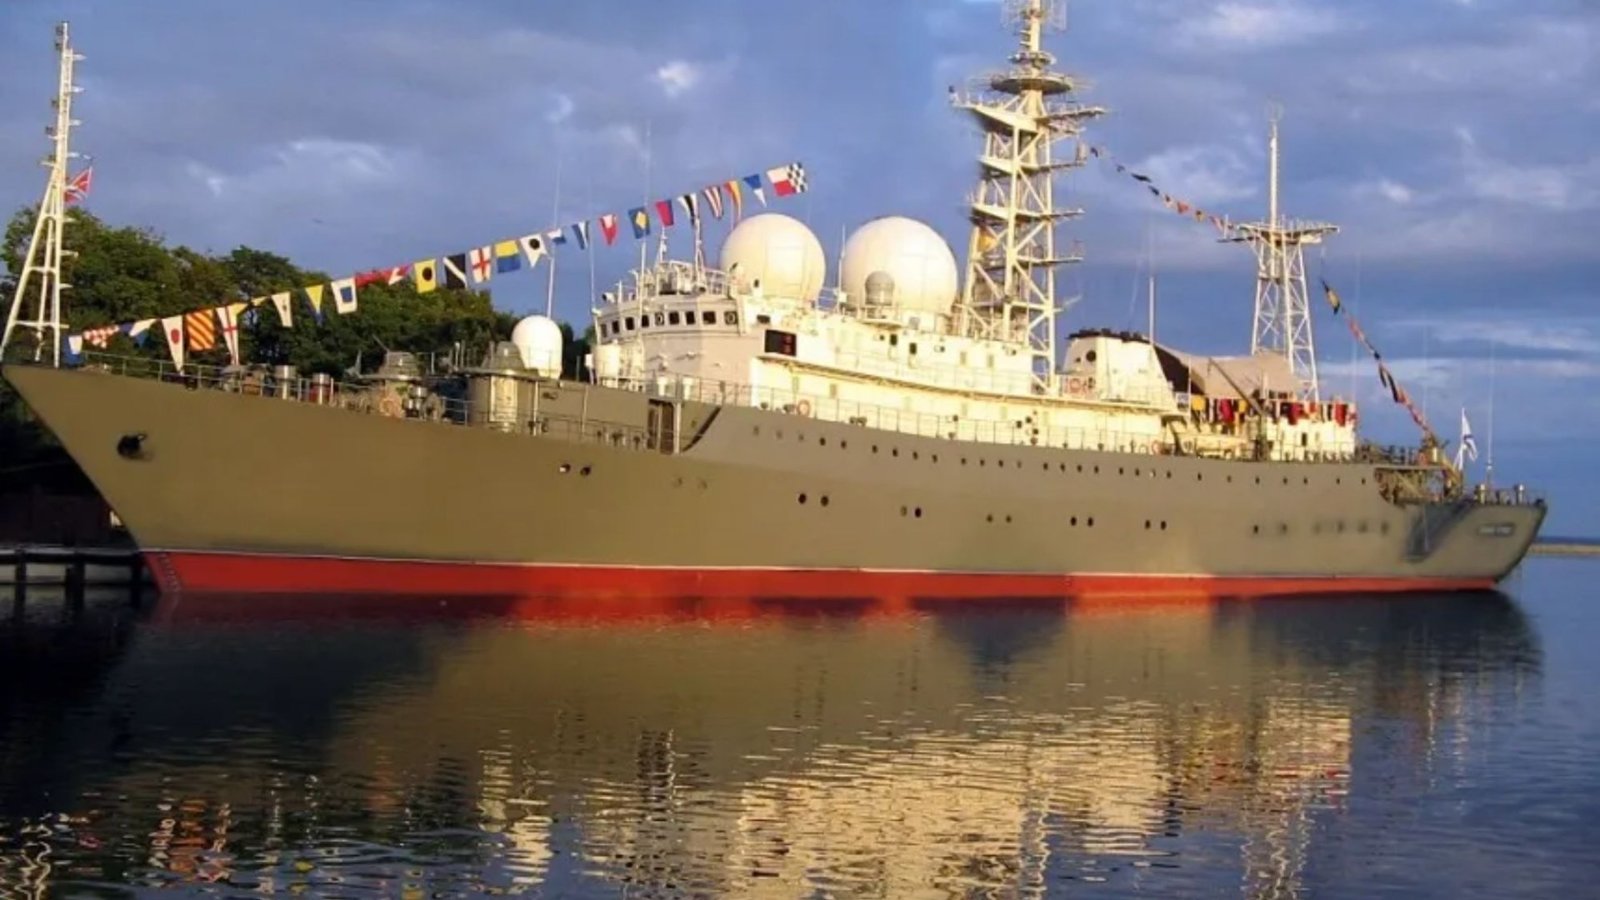 Putin launches SPY SHIP wiretap attack on Germany during Euros as chilling recon vessel appears in Baltic sea